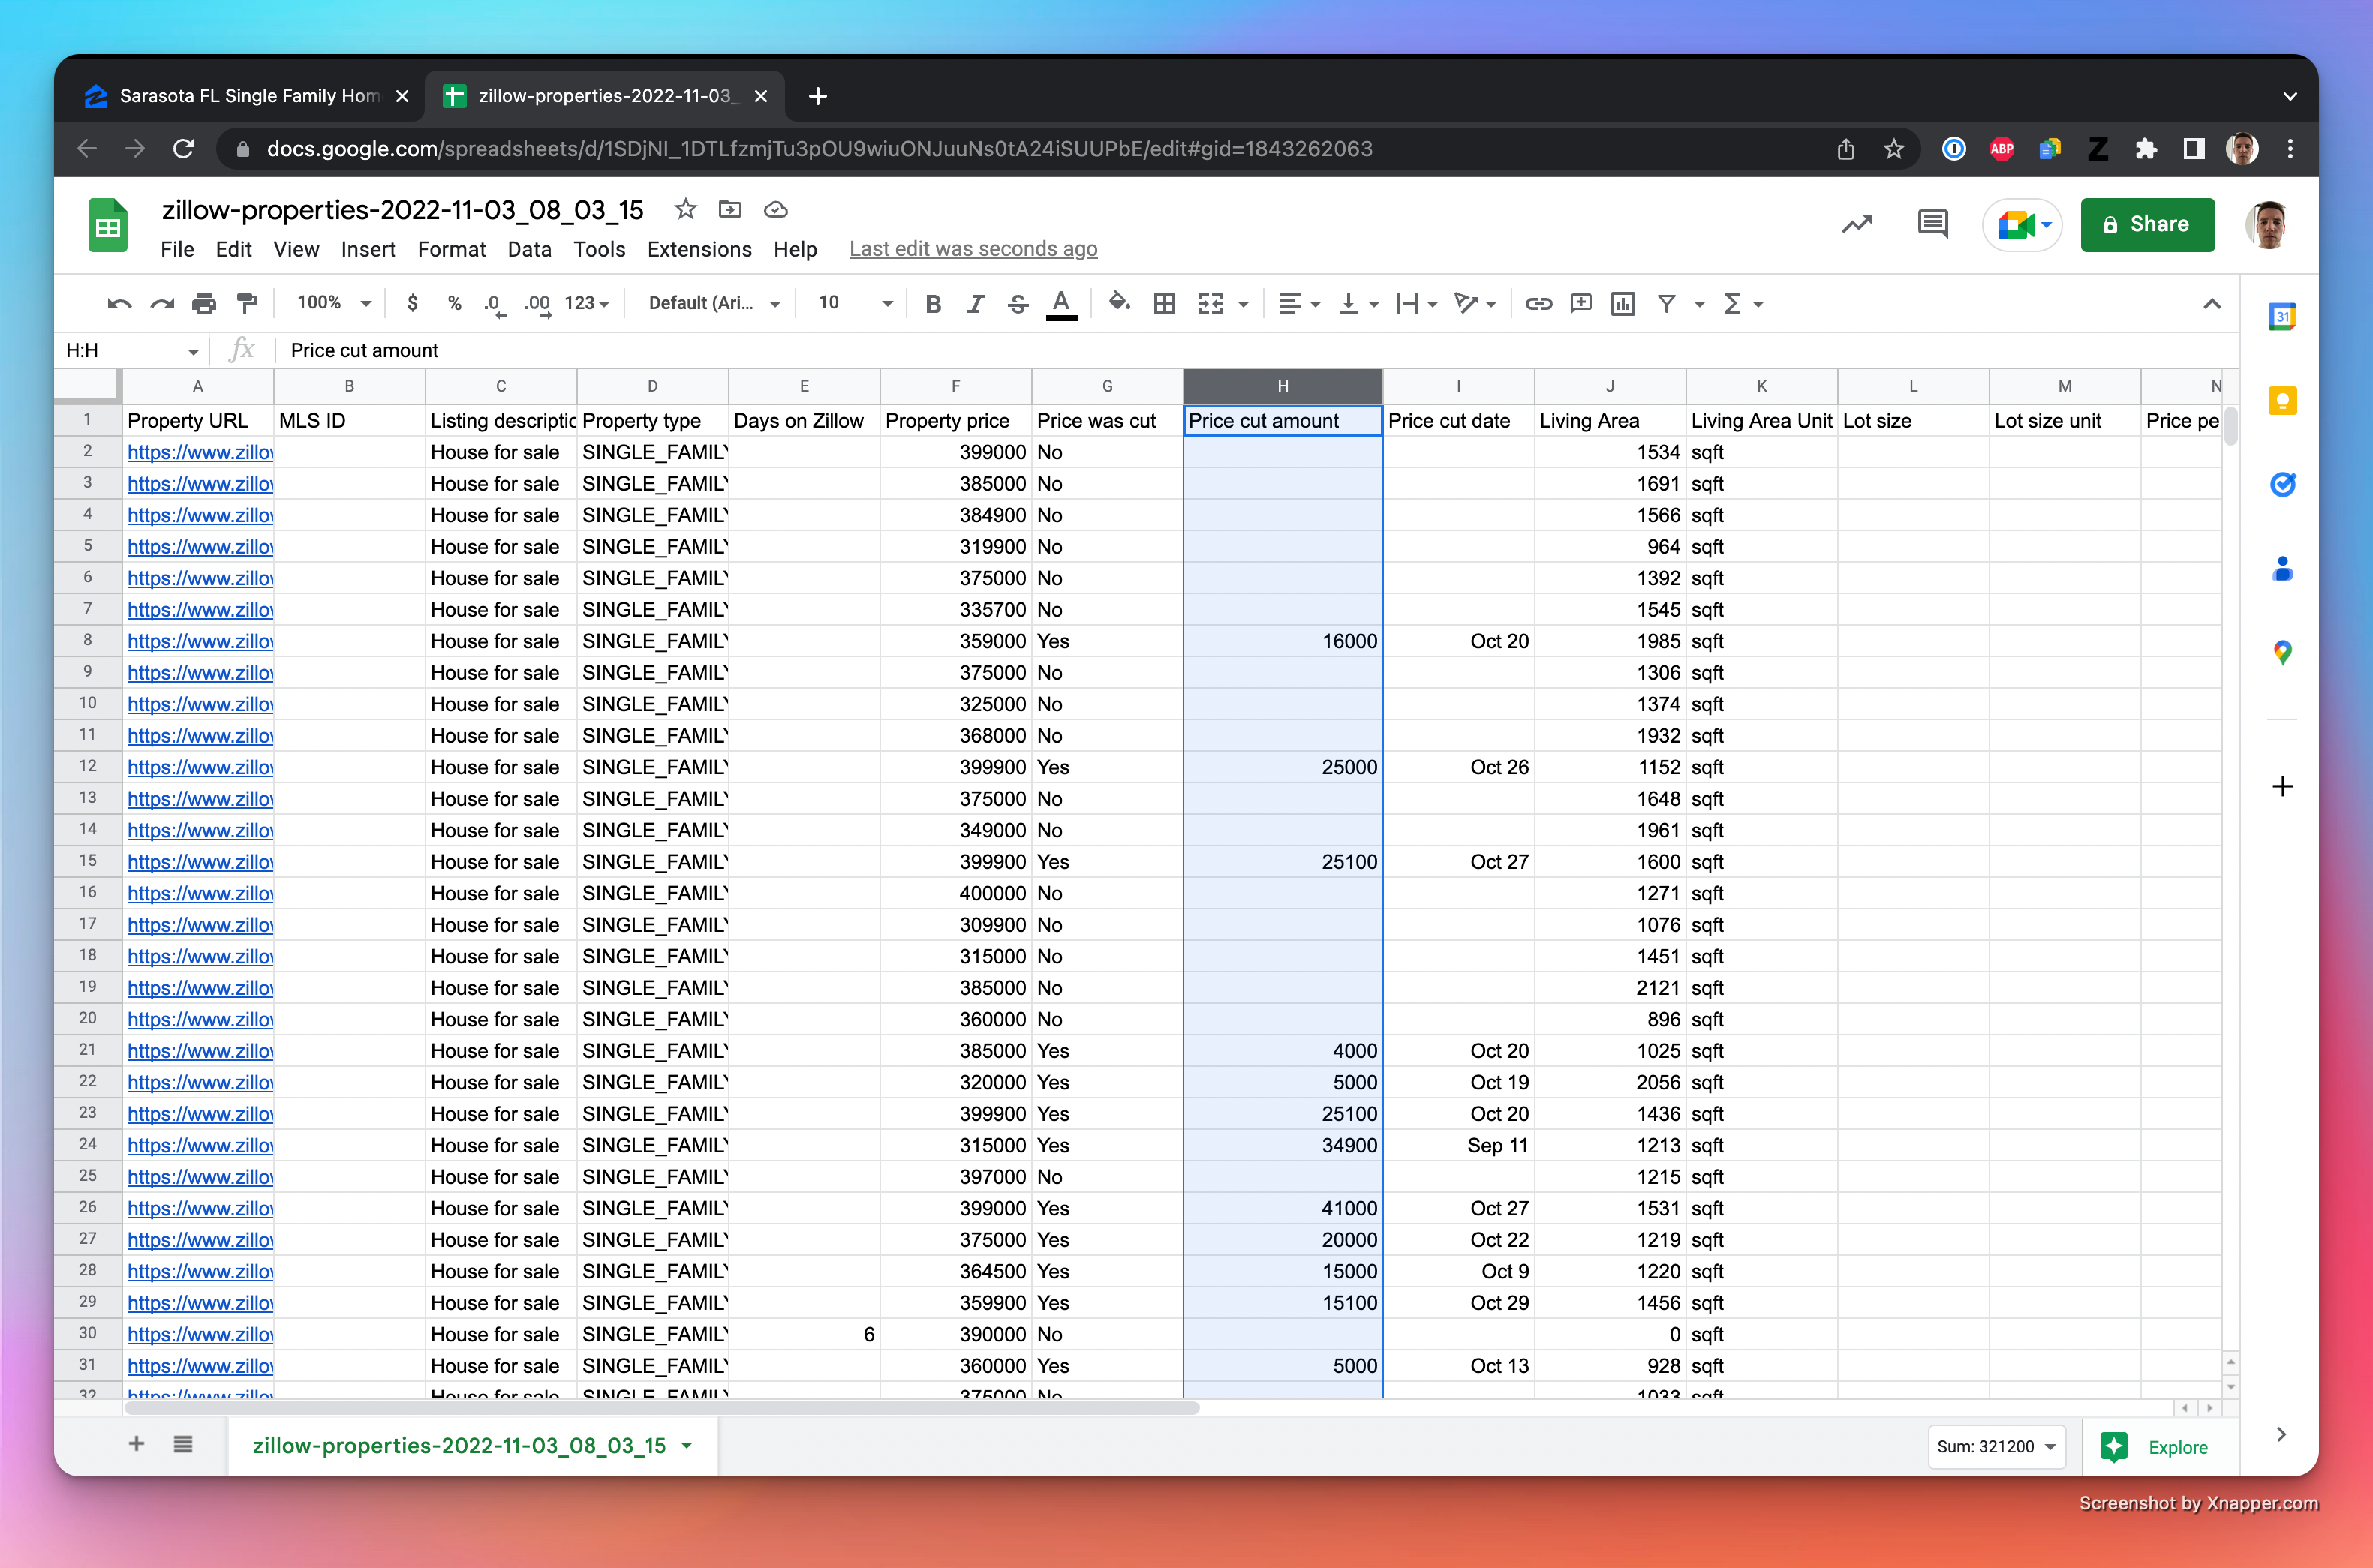 Image of the data exported from Zillow in Google Sheets